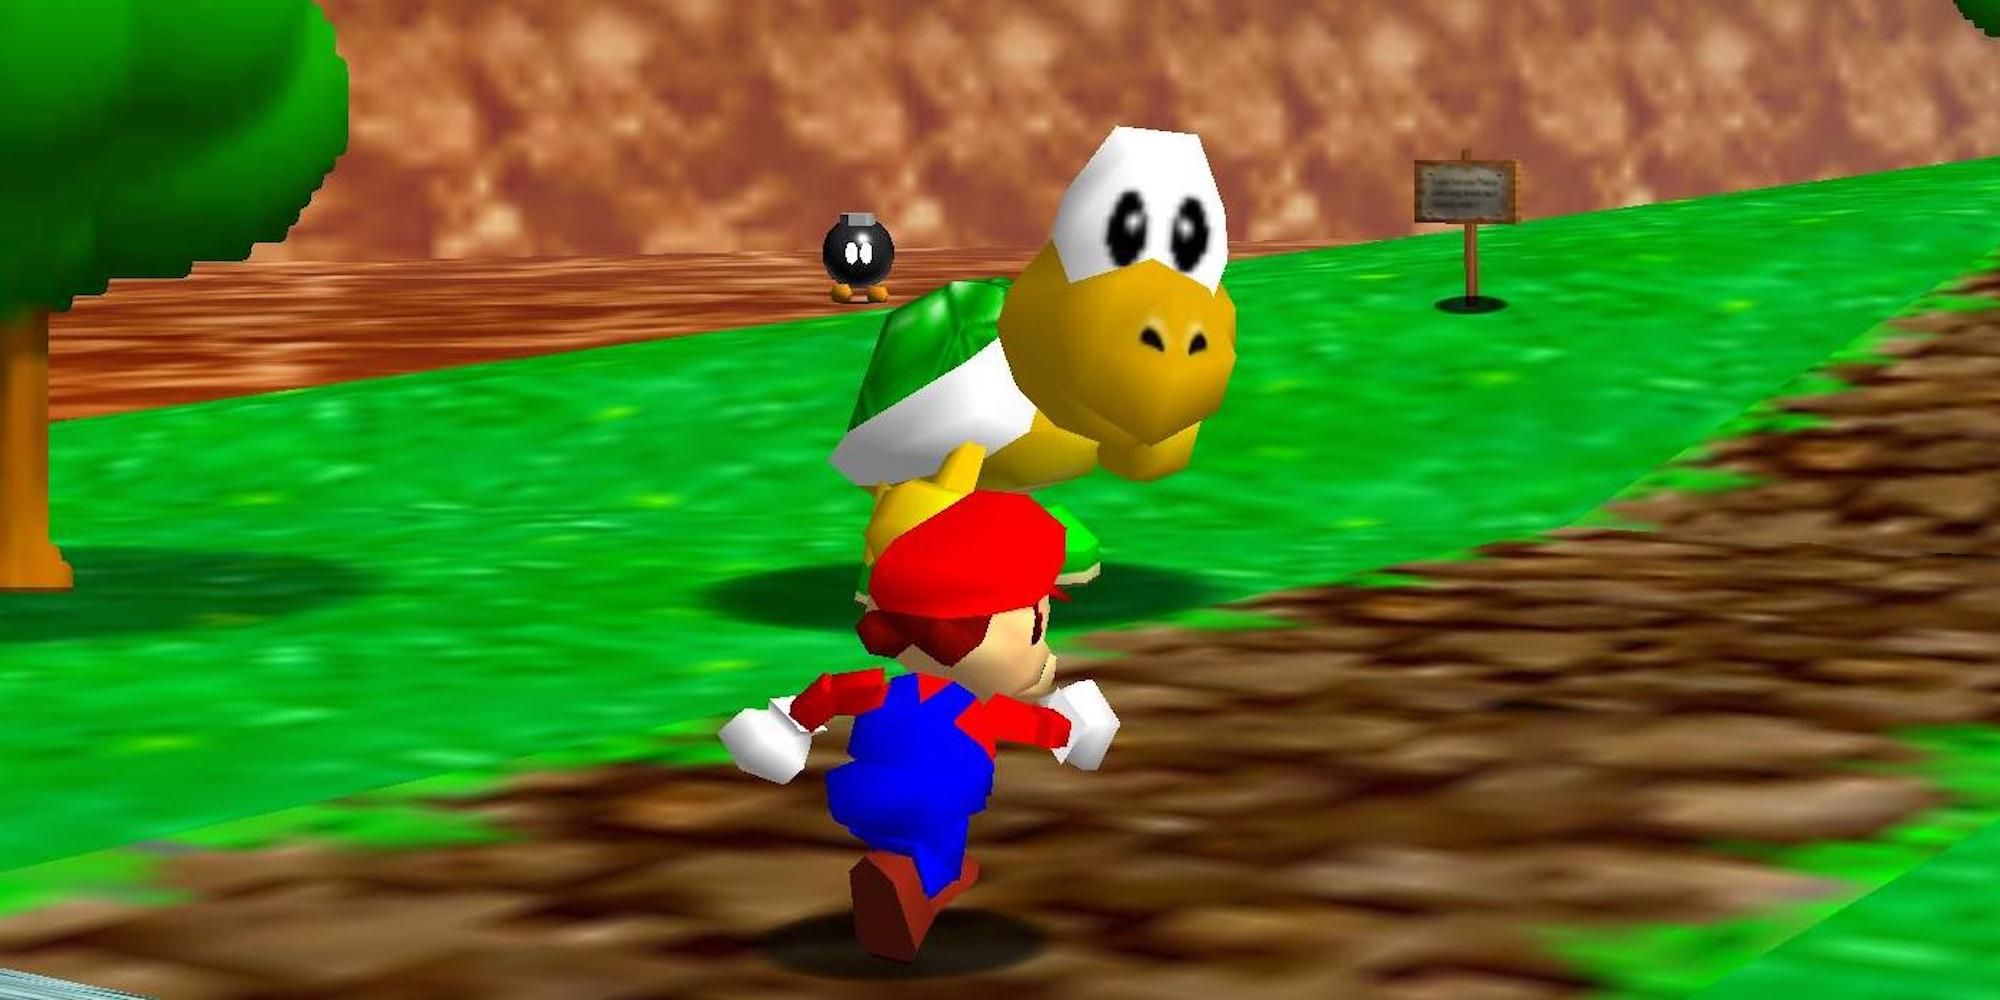 the first level from Super Mario 64